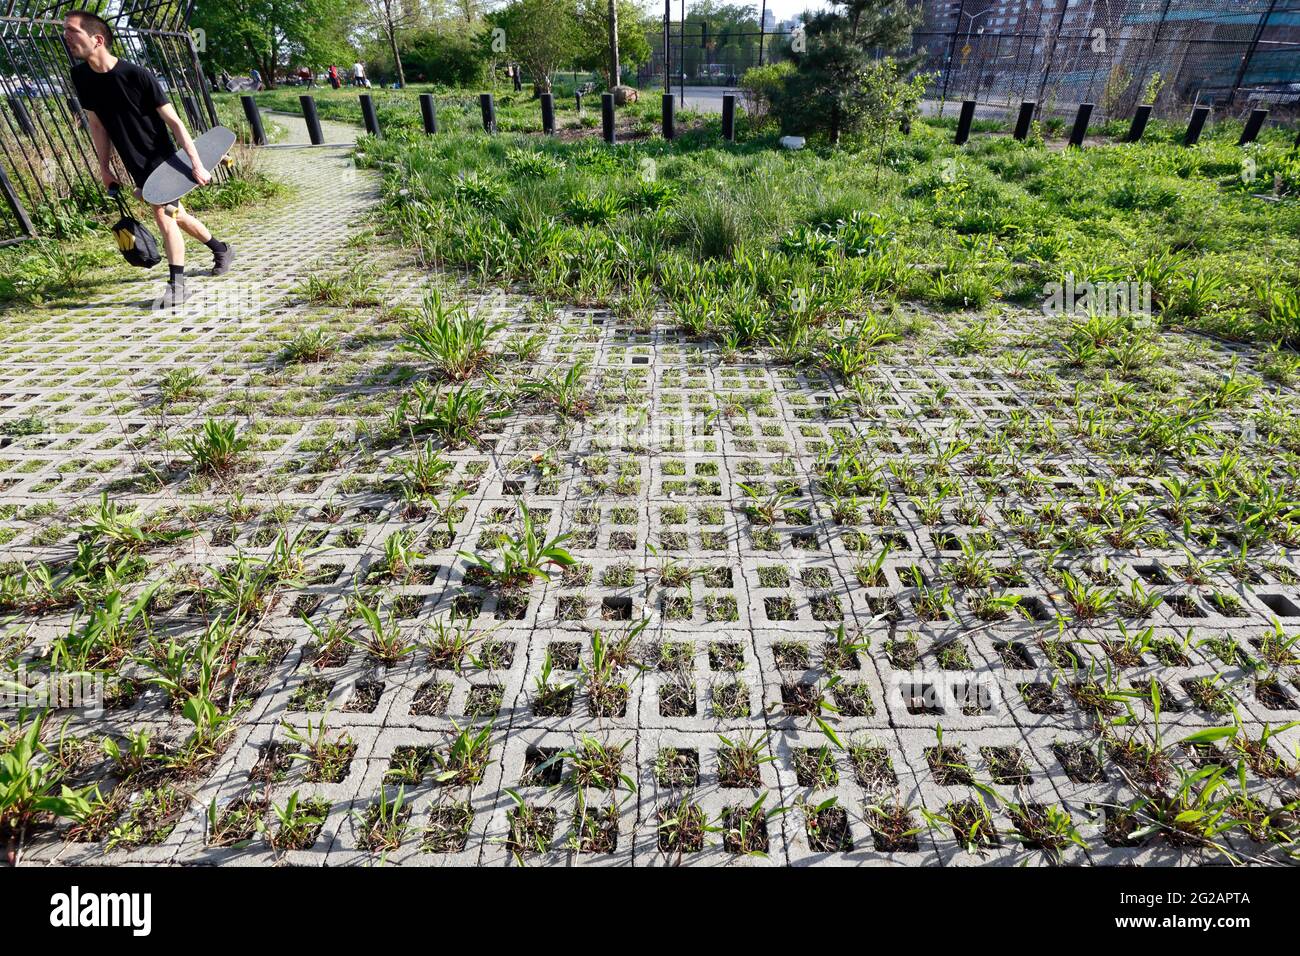 A plaza paved with permeable pavers at East River Park in Manhattan's Lower East Side, New York, NY. Permeable pavers slows stormwater runoff Stock Photo